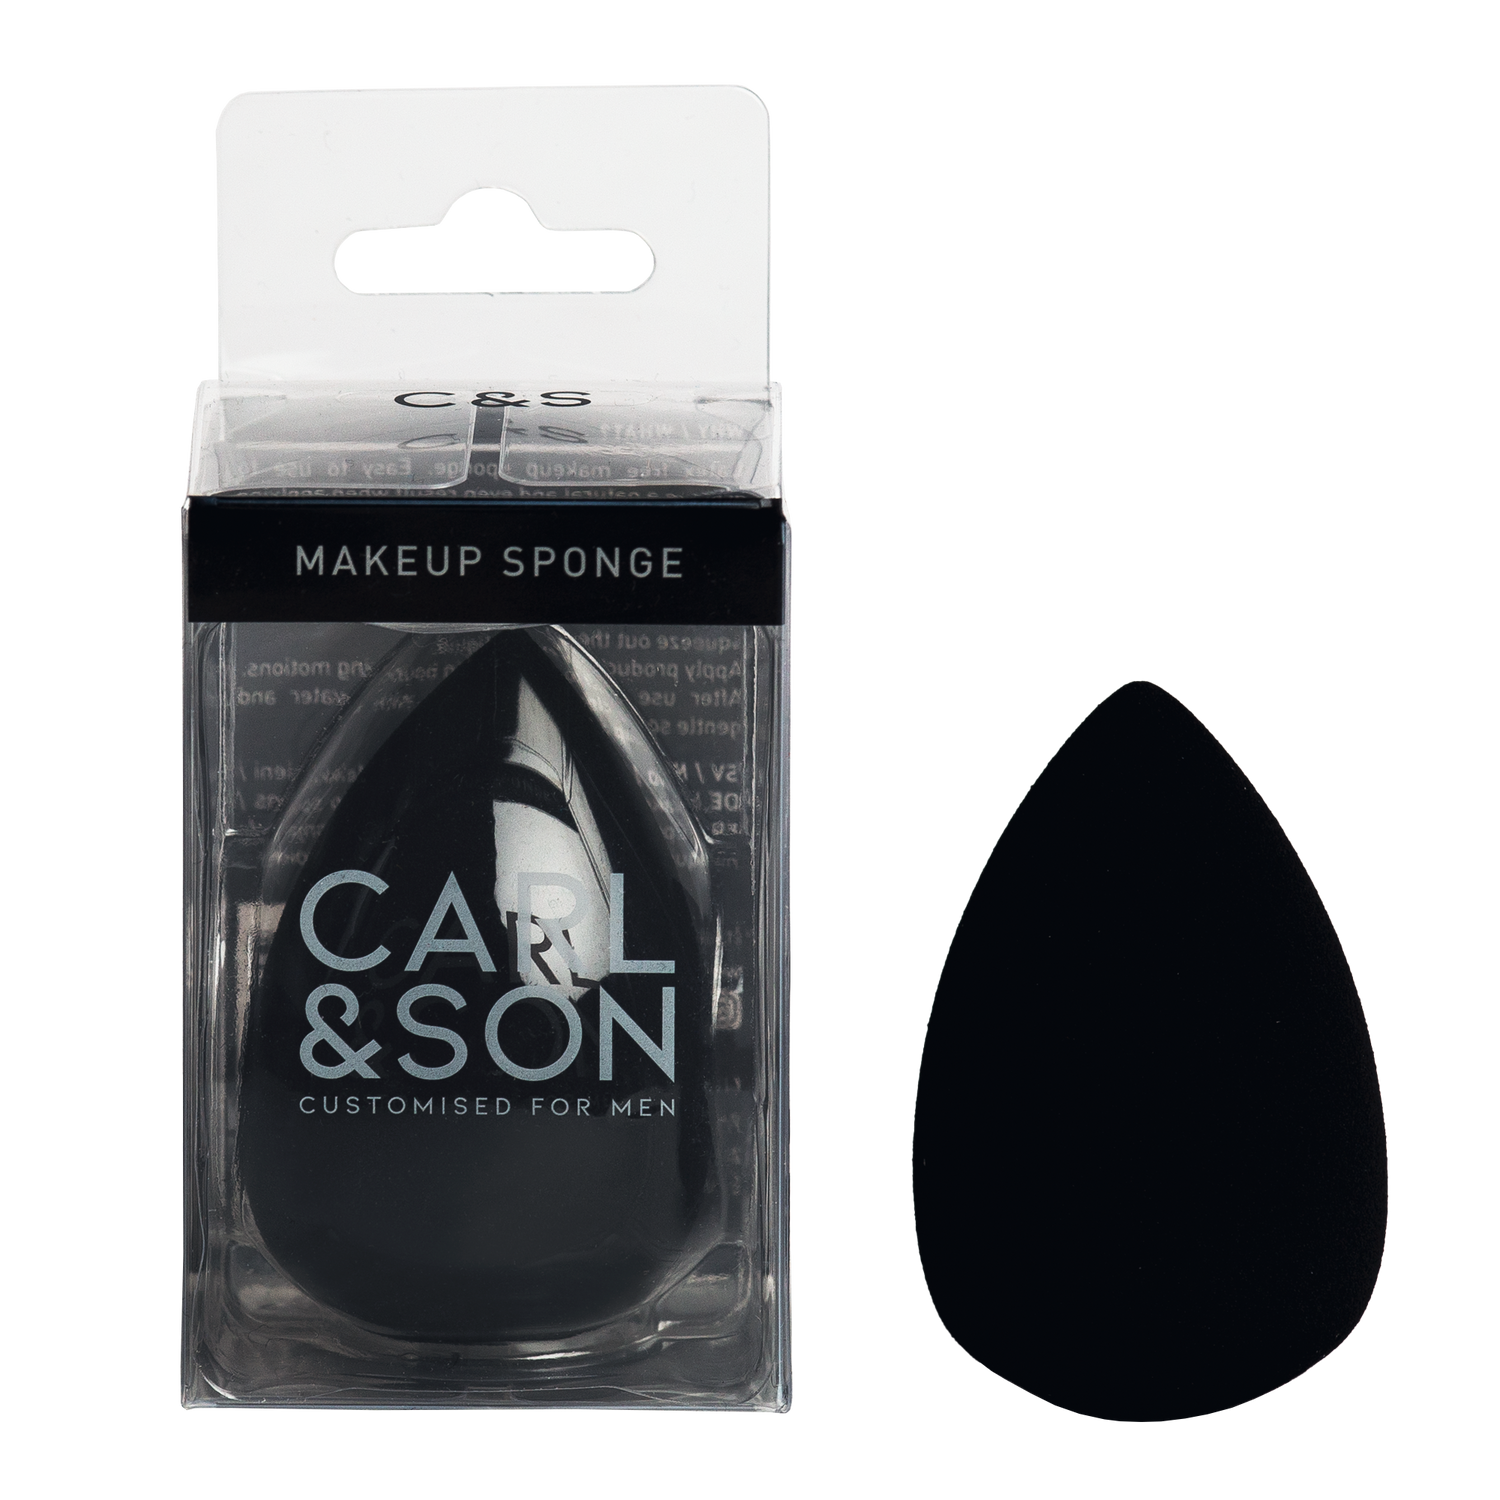 makeup sponge in cartonage and without